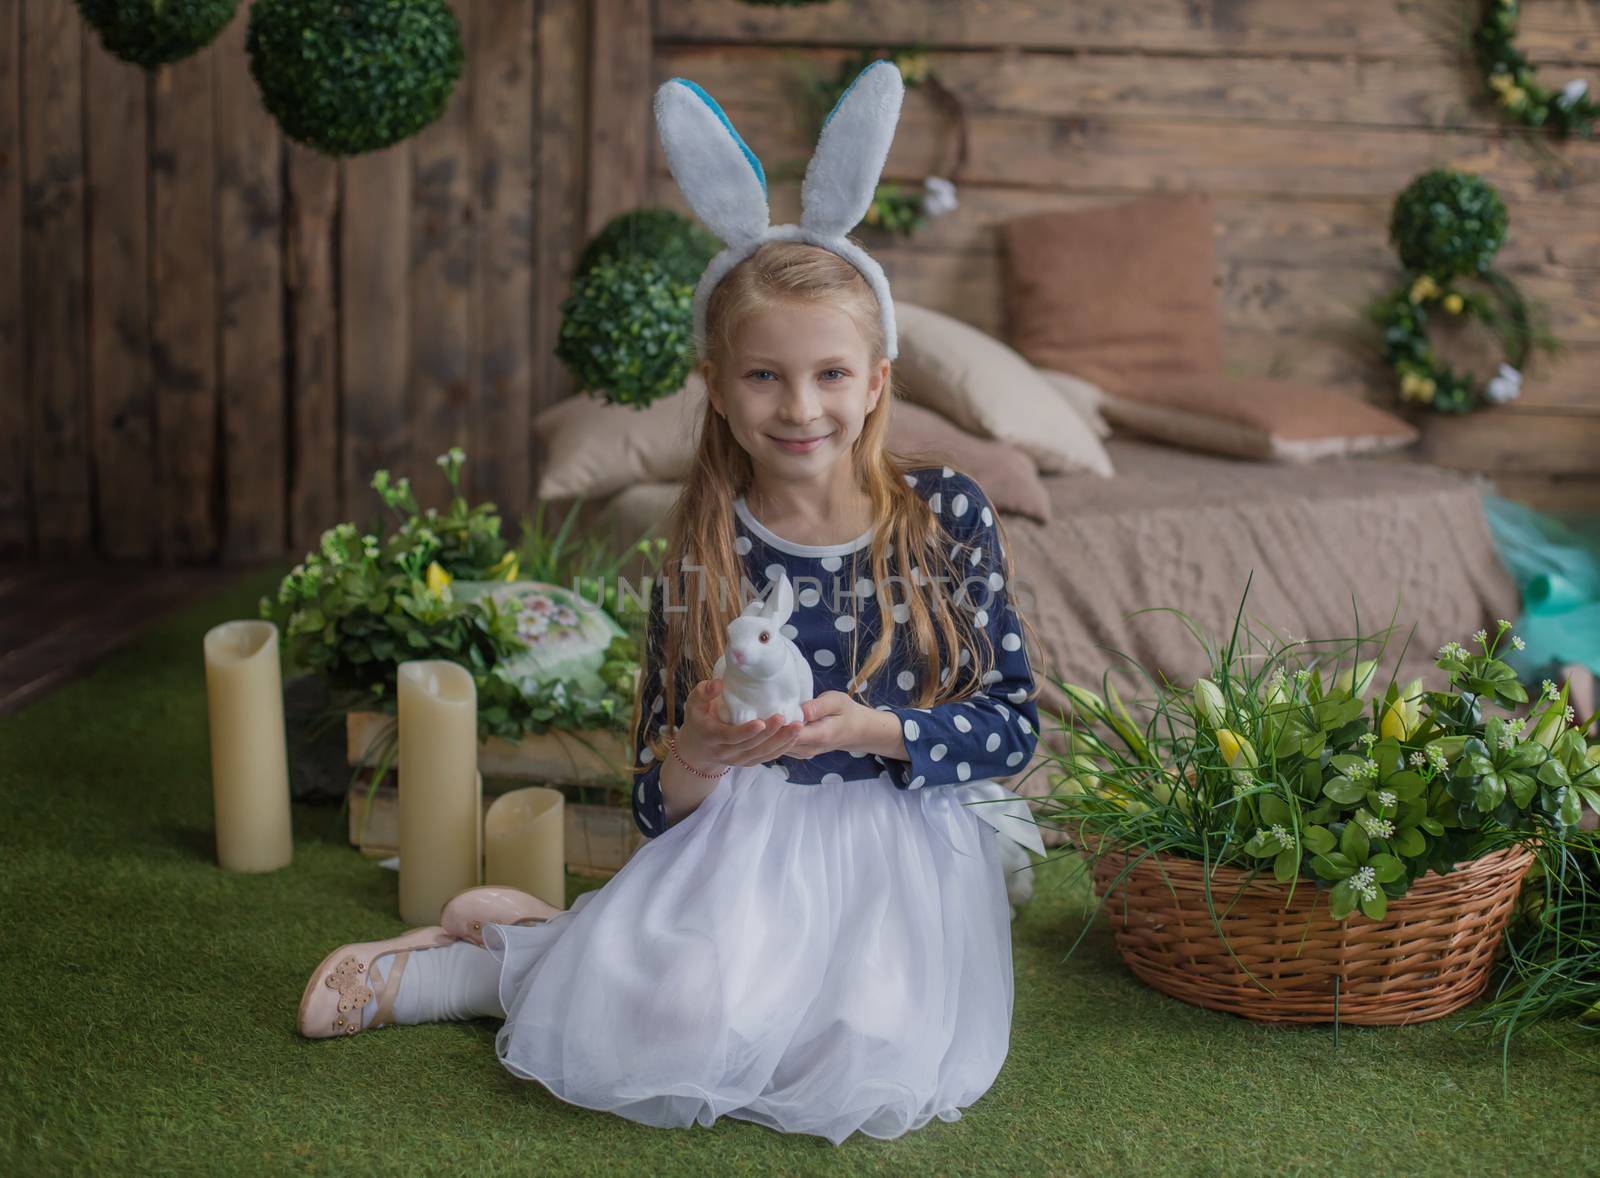 Funny portrait of girl having fun on Easter wearing bunny ears during spring season